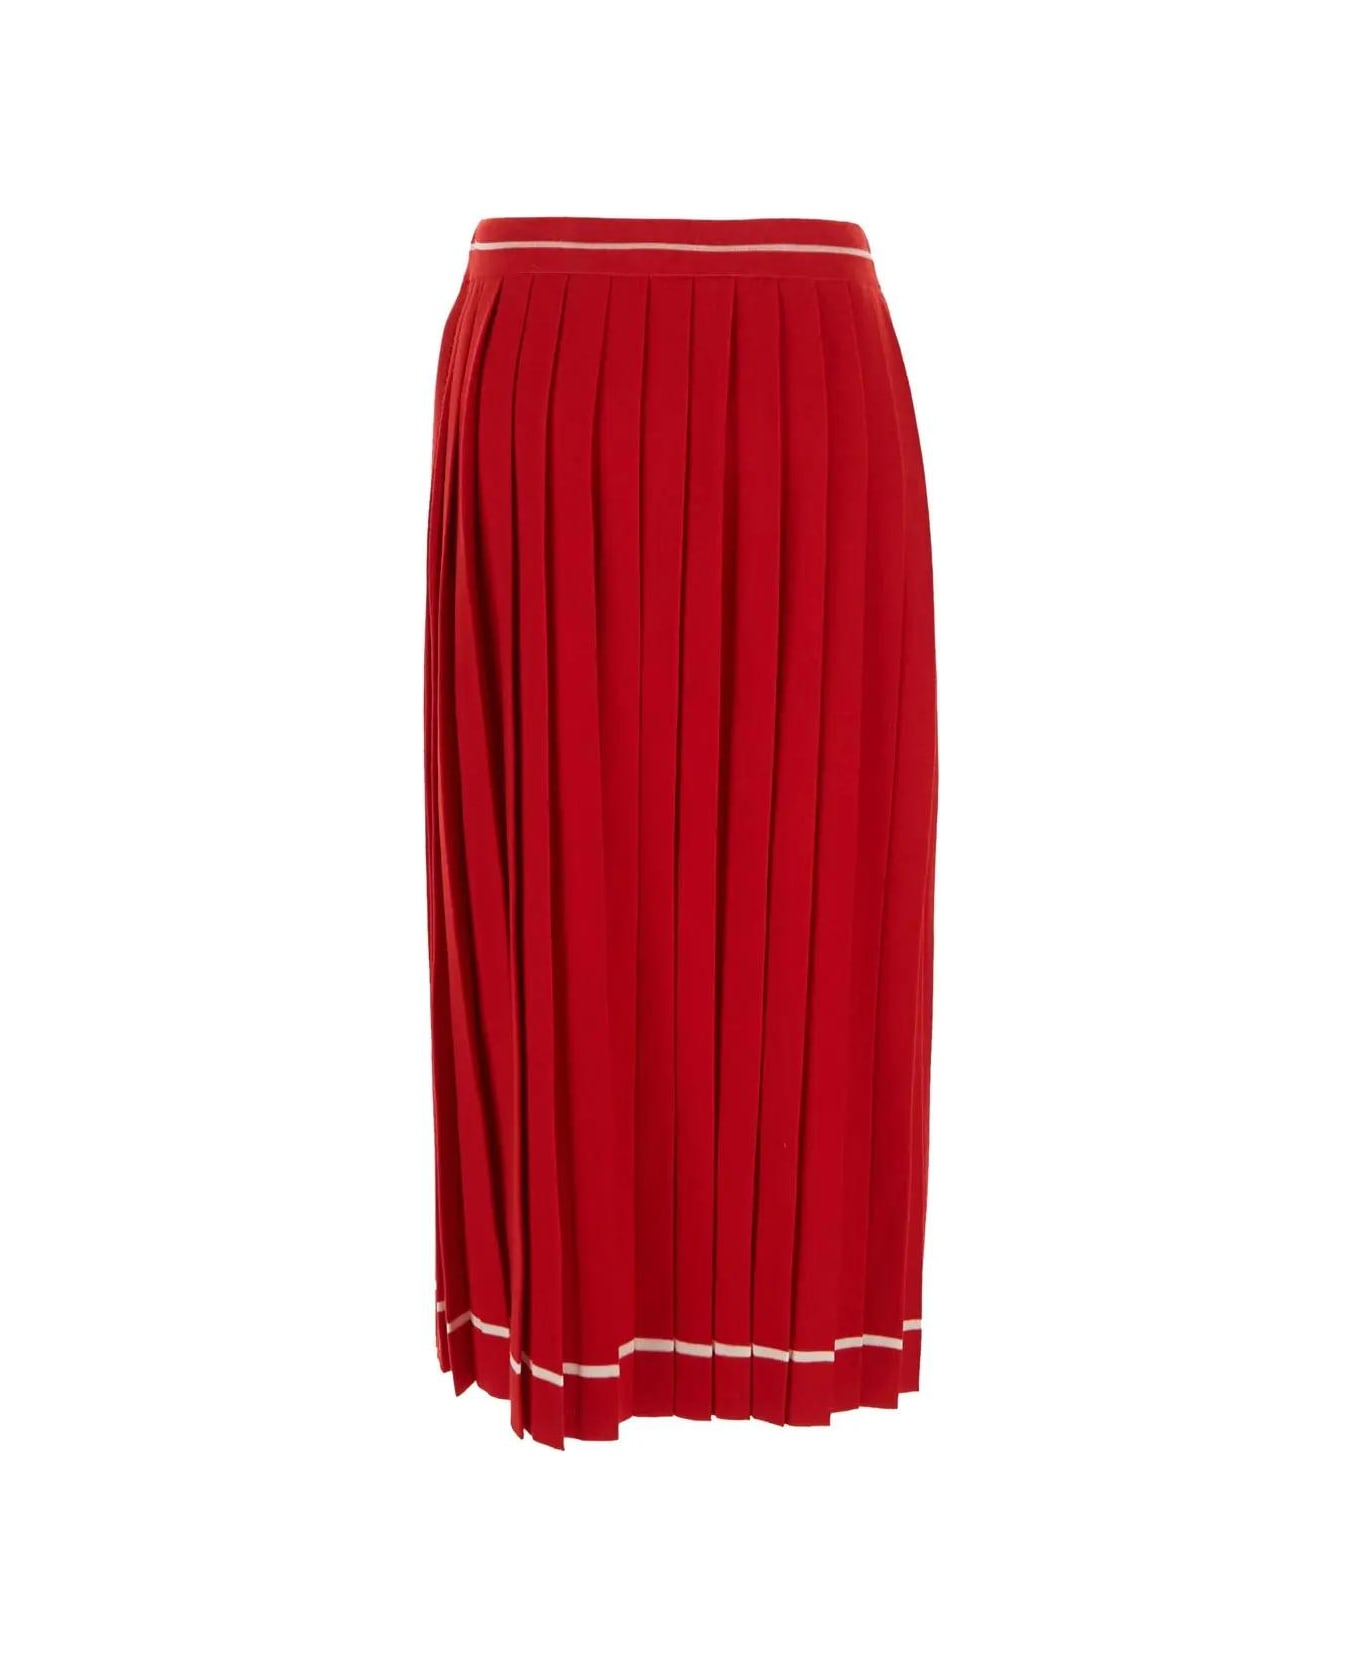 Gucci Pleated Wool Skirt - Red スカート